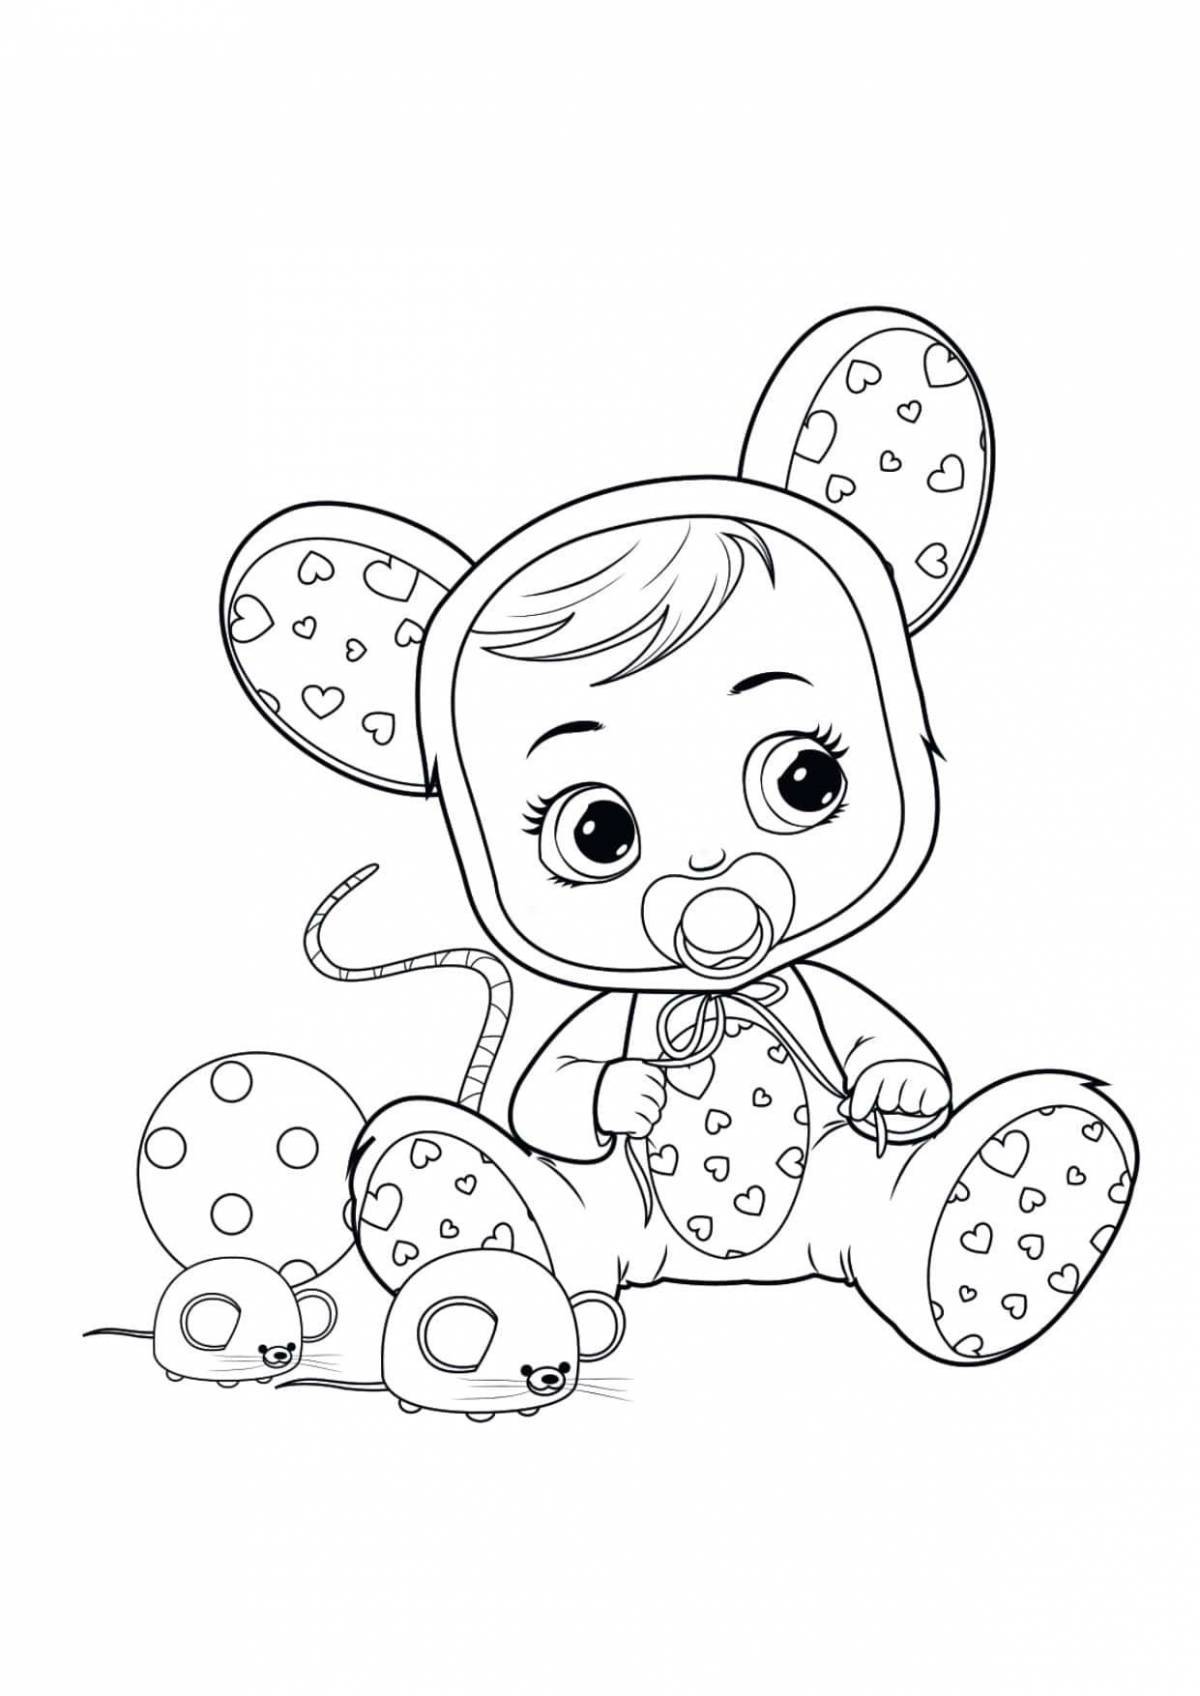 The edge of the Nice Babies coloring page